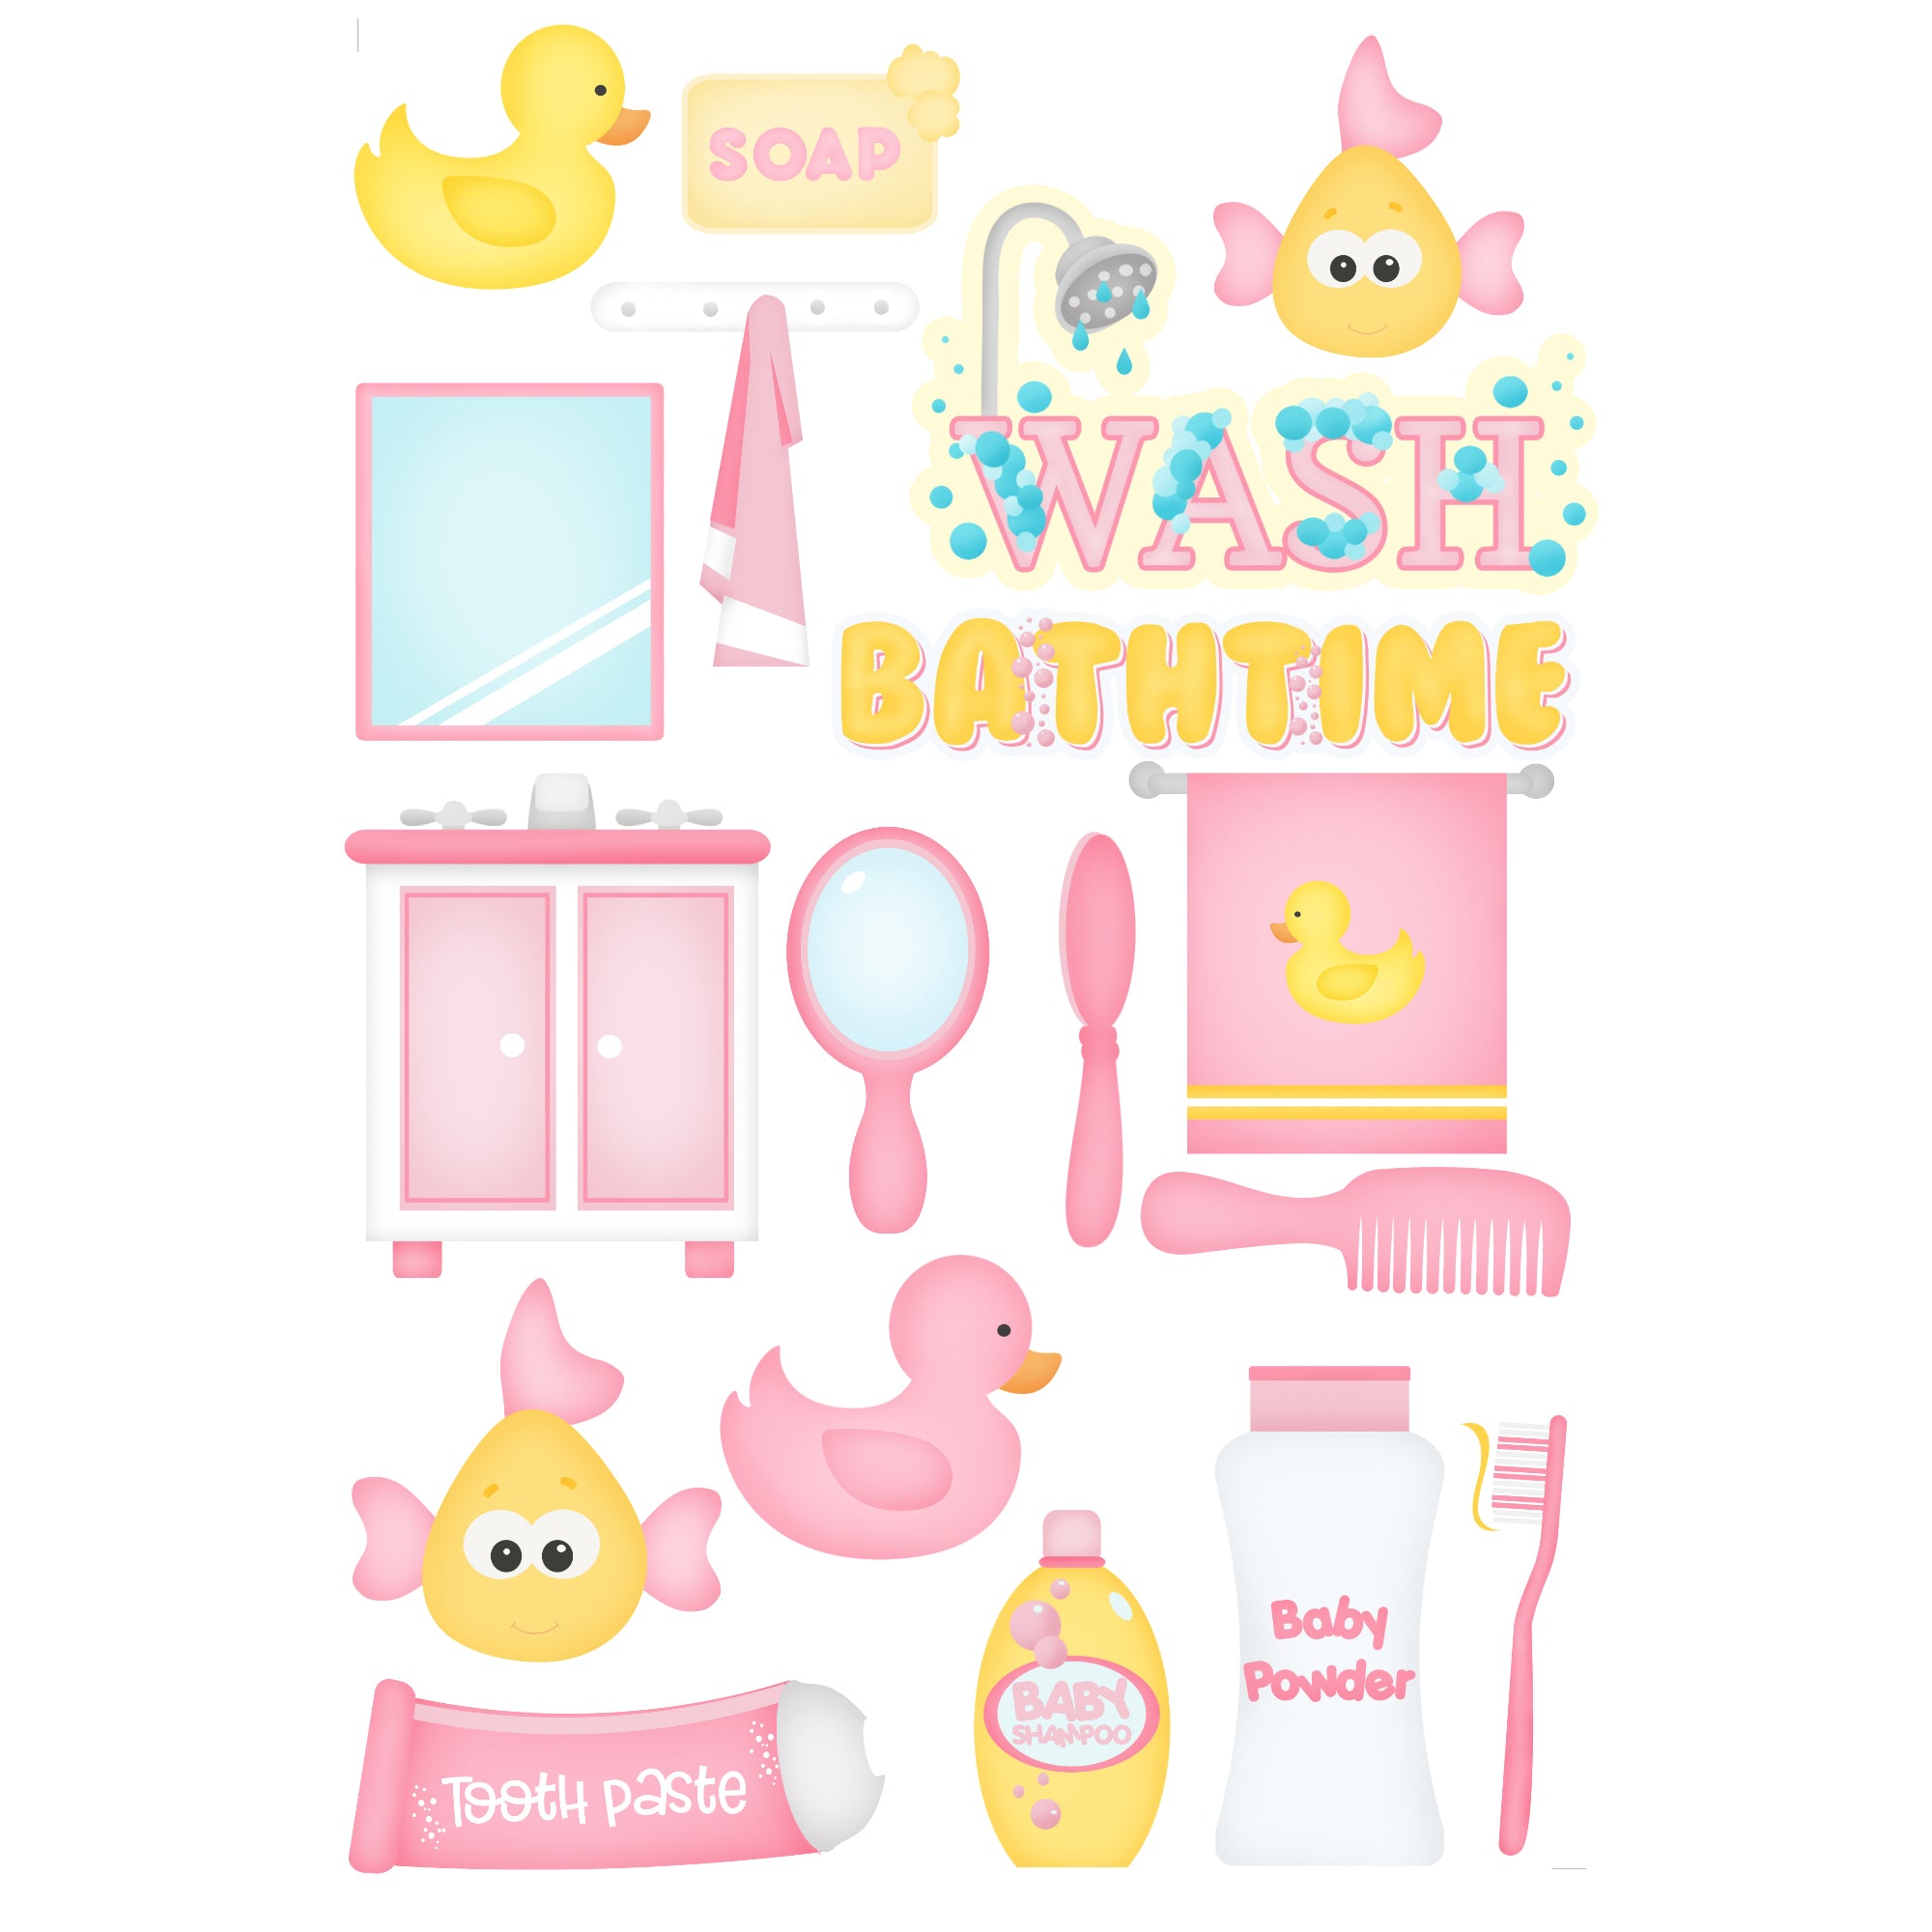 Bathtub Time Girl 12 x 12 Double-Sided Scrapbook Paper & Embellishment Kit by SSC Designs